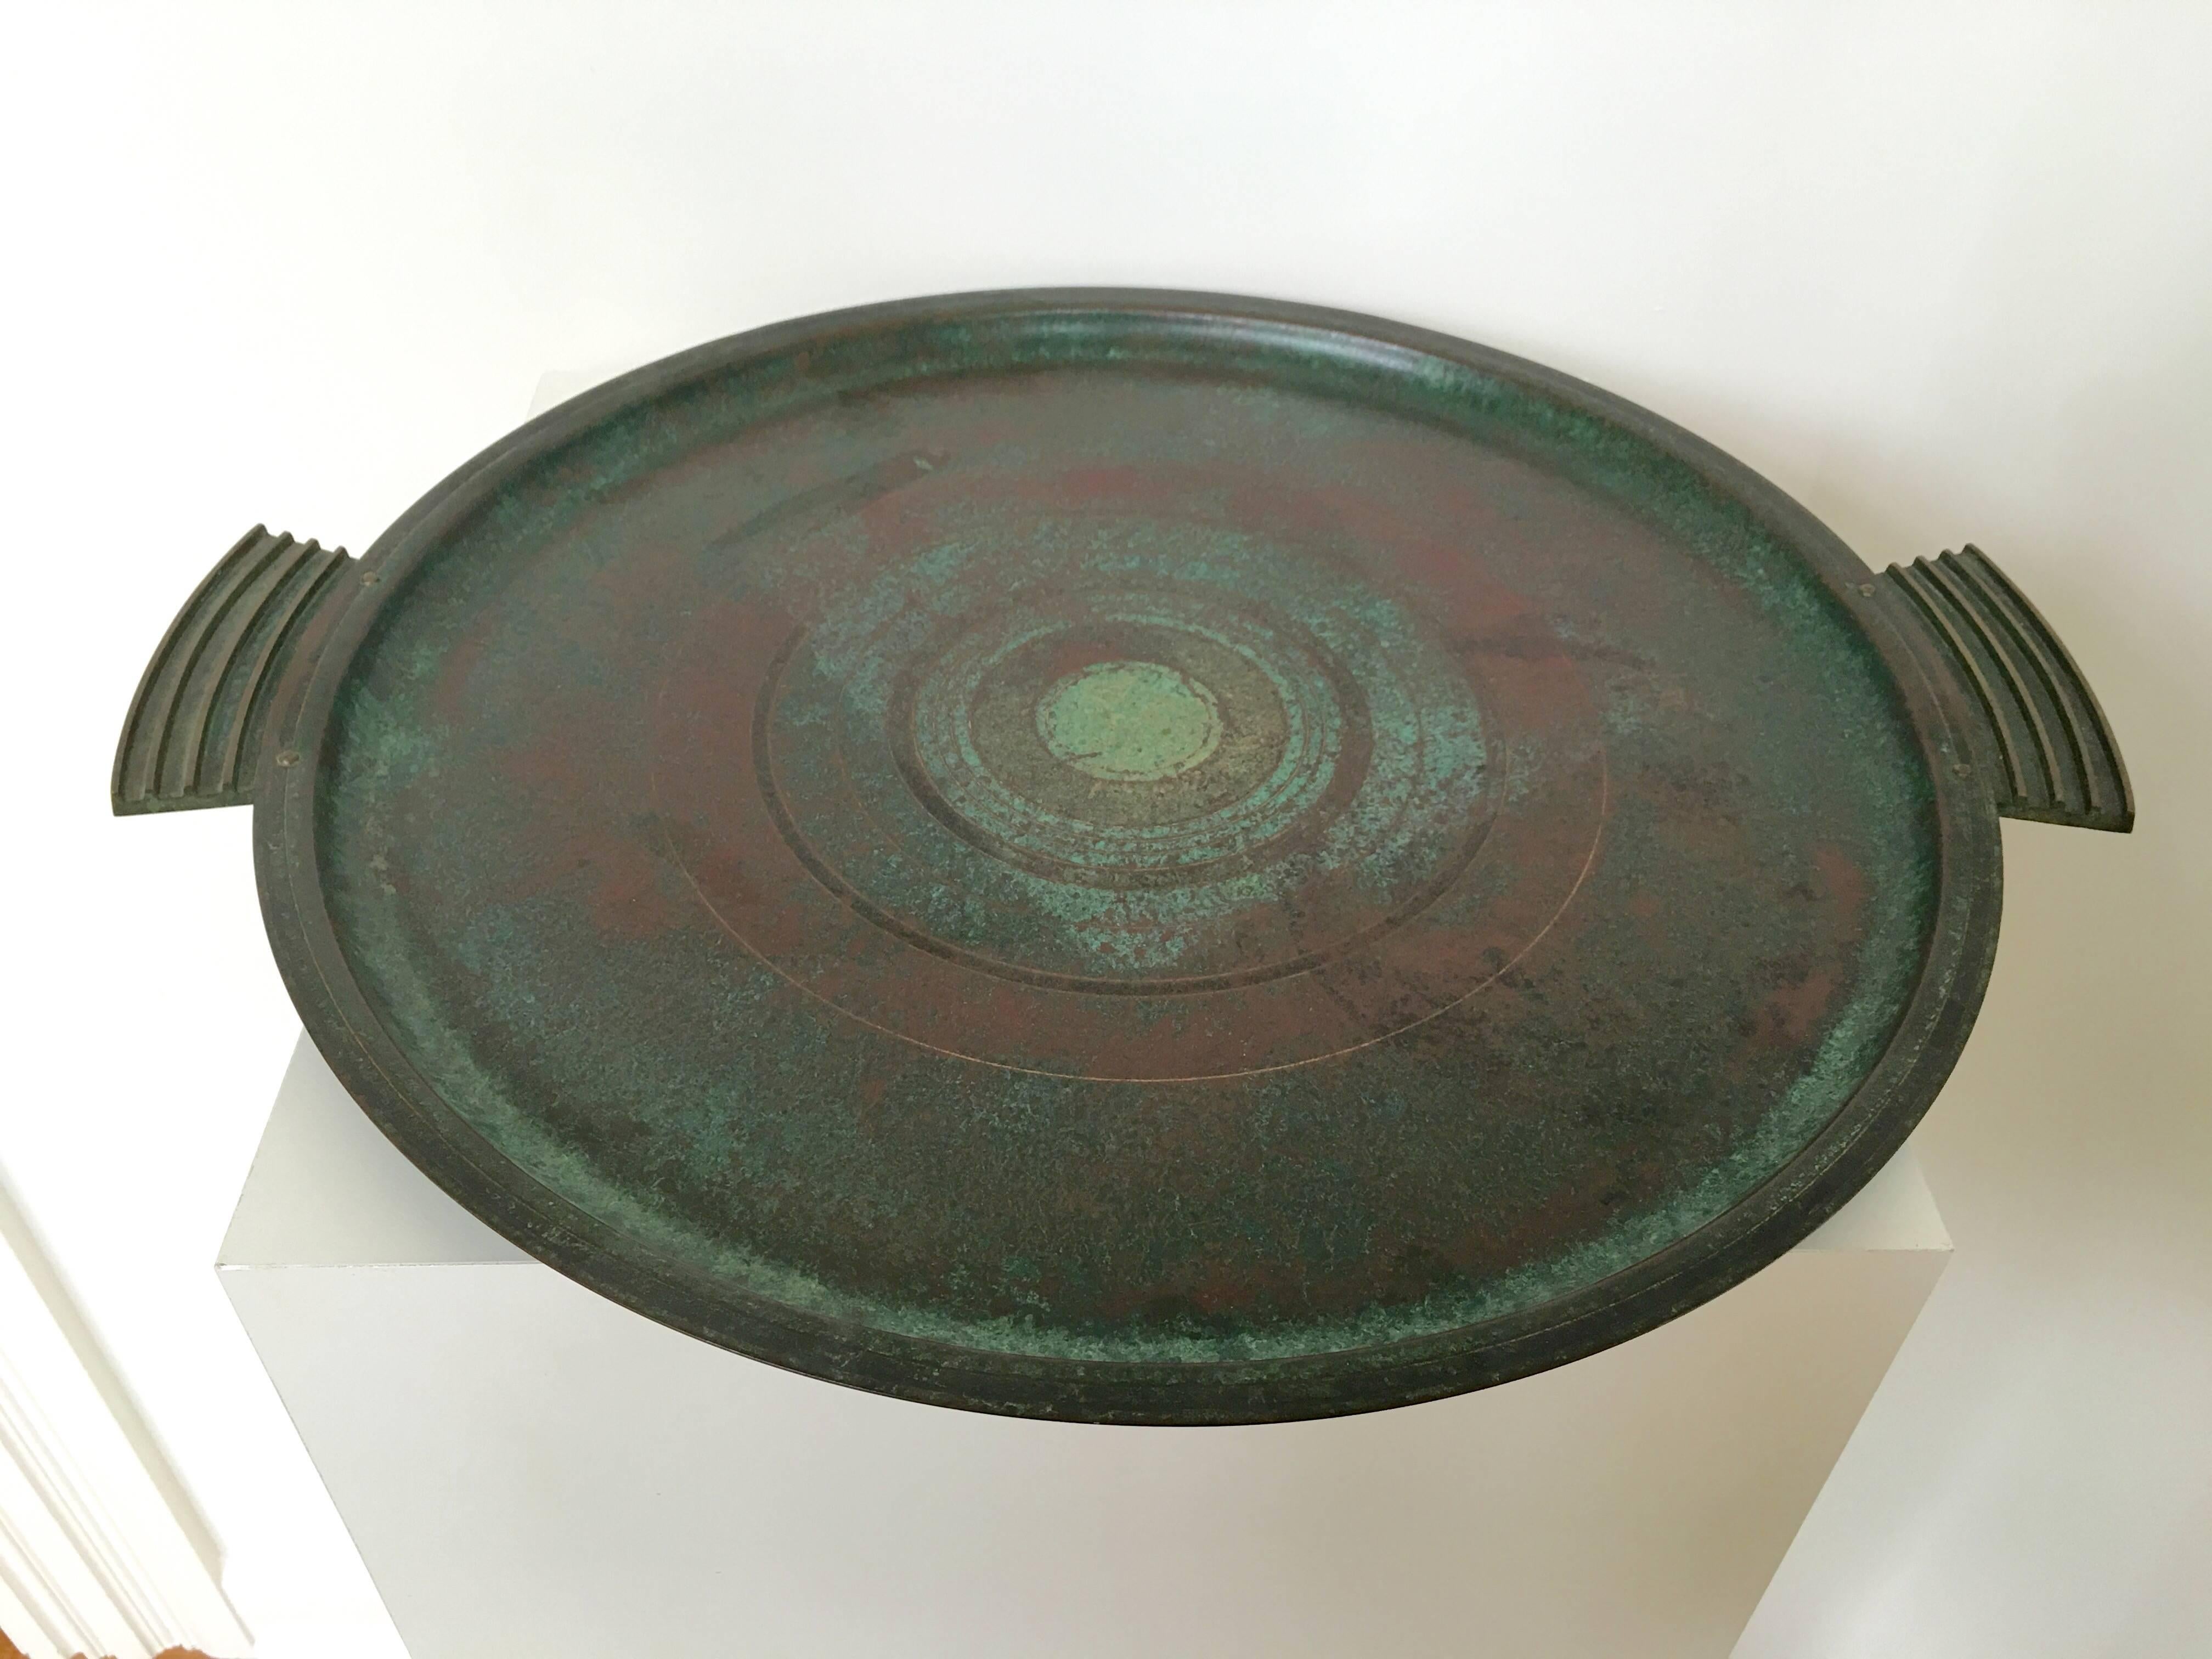 A rare and sizable bronze tray by Carl Sorensen, signed. Perfectly reflective of the Arts & Crafts period with hand tooled details. The verdigris patina is gorgeous.